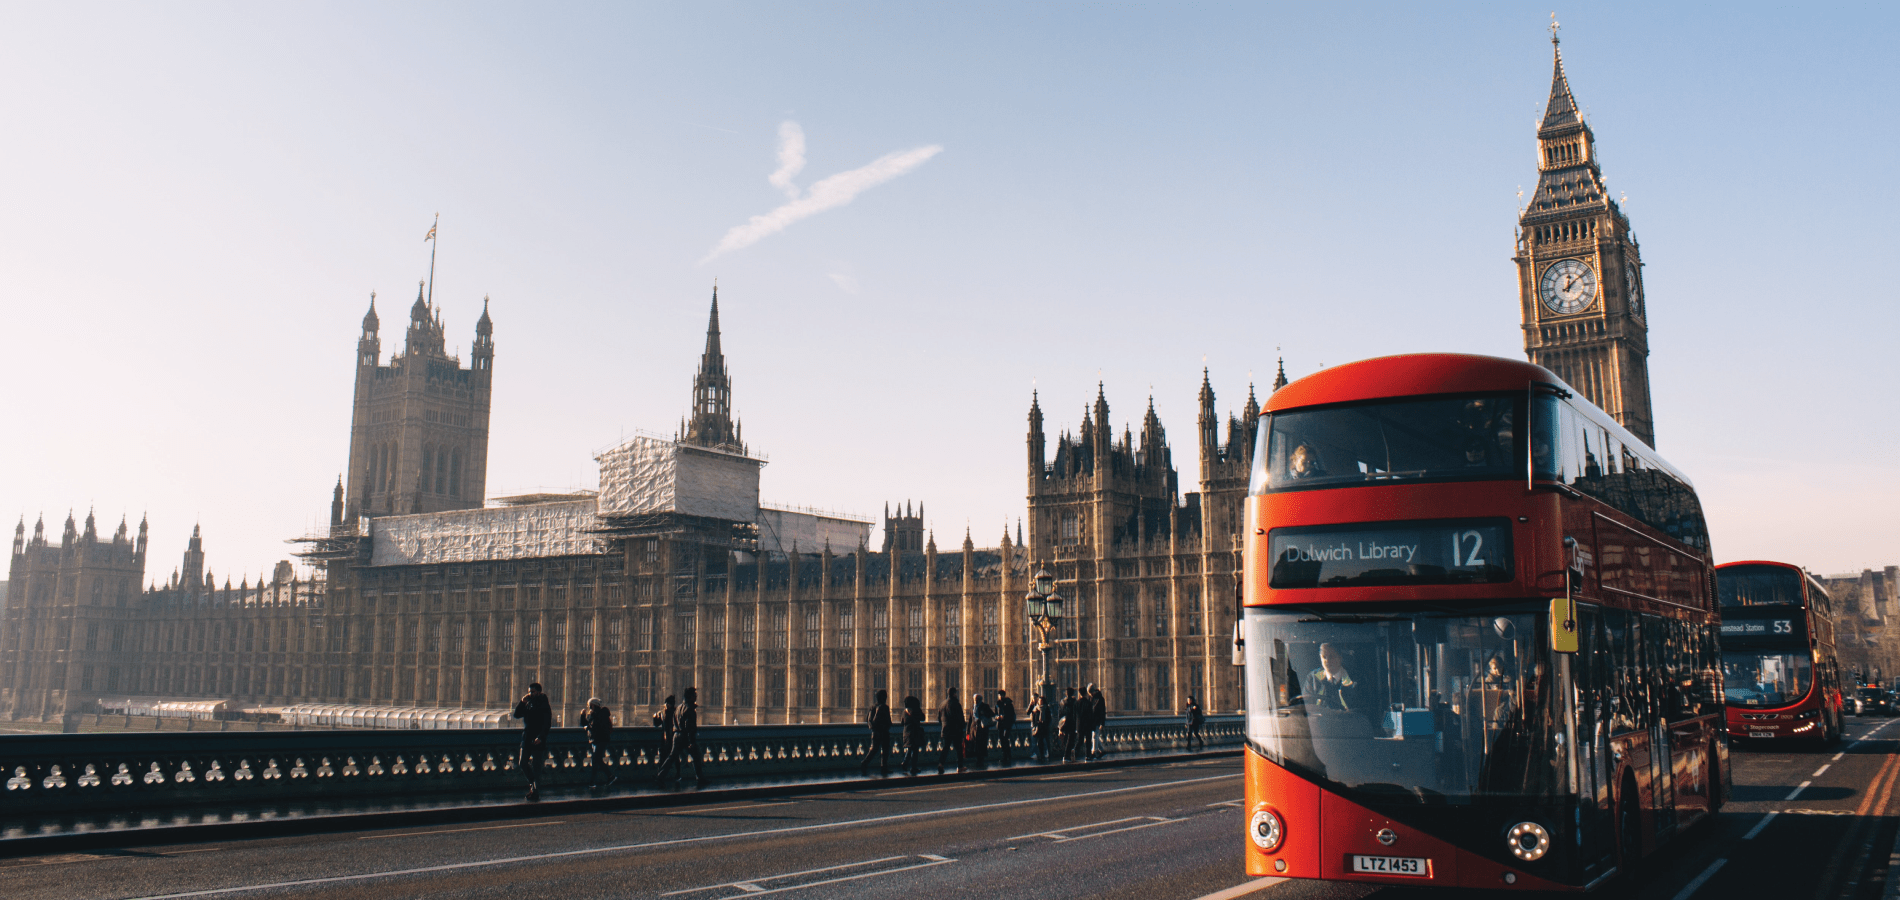 image of buildings and bus in England